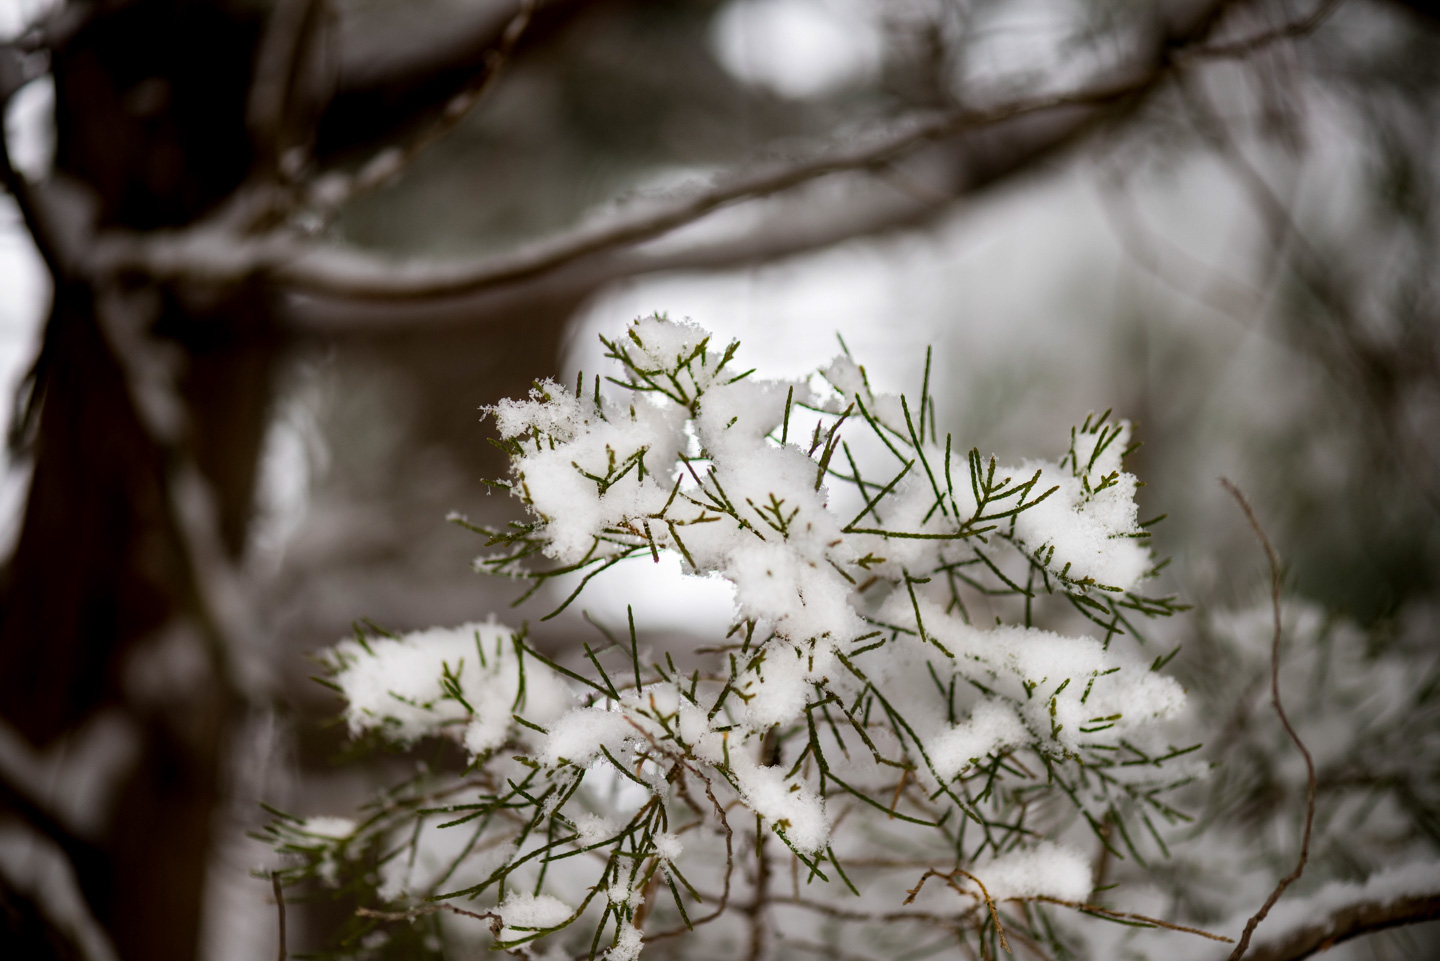 Evergreen needles covered with snow